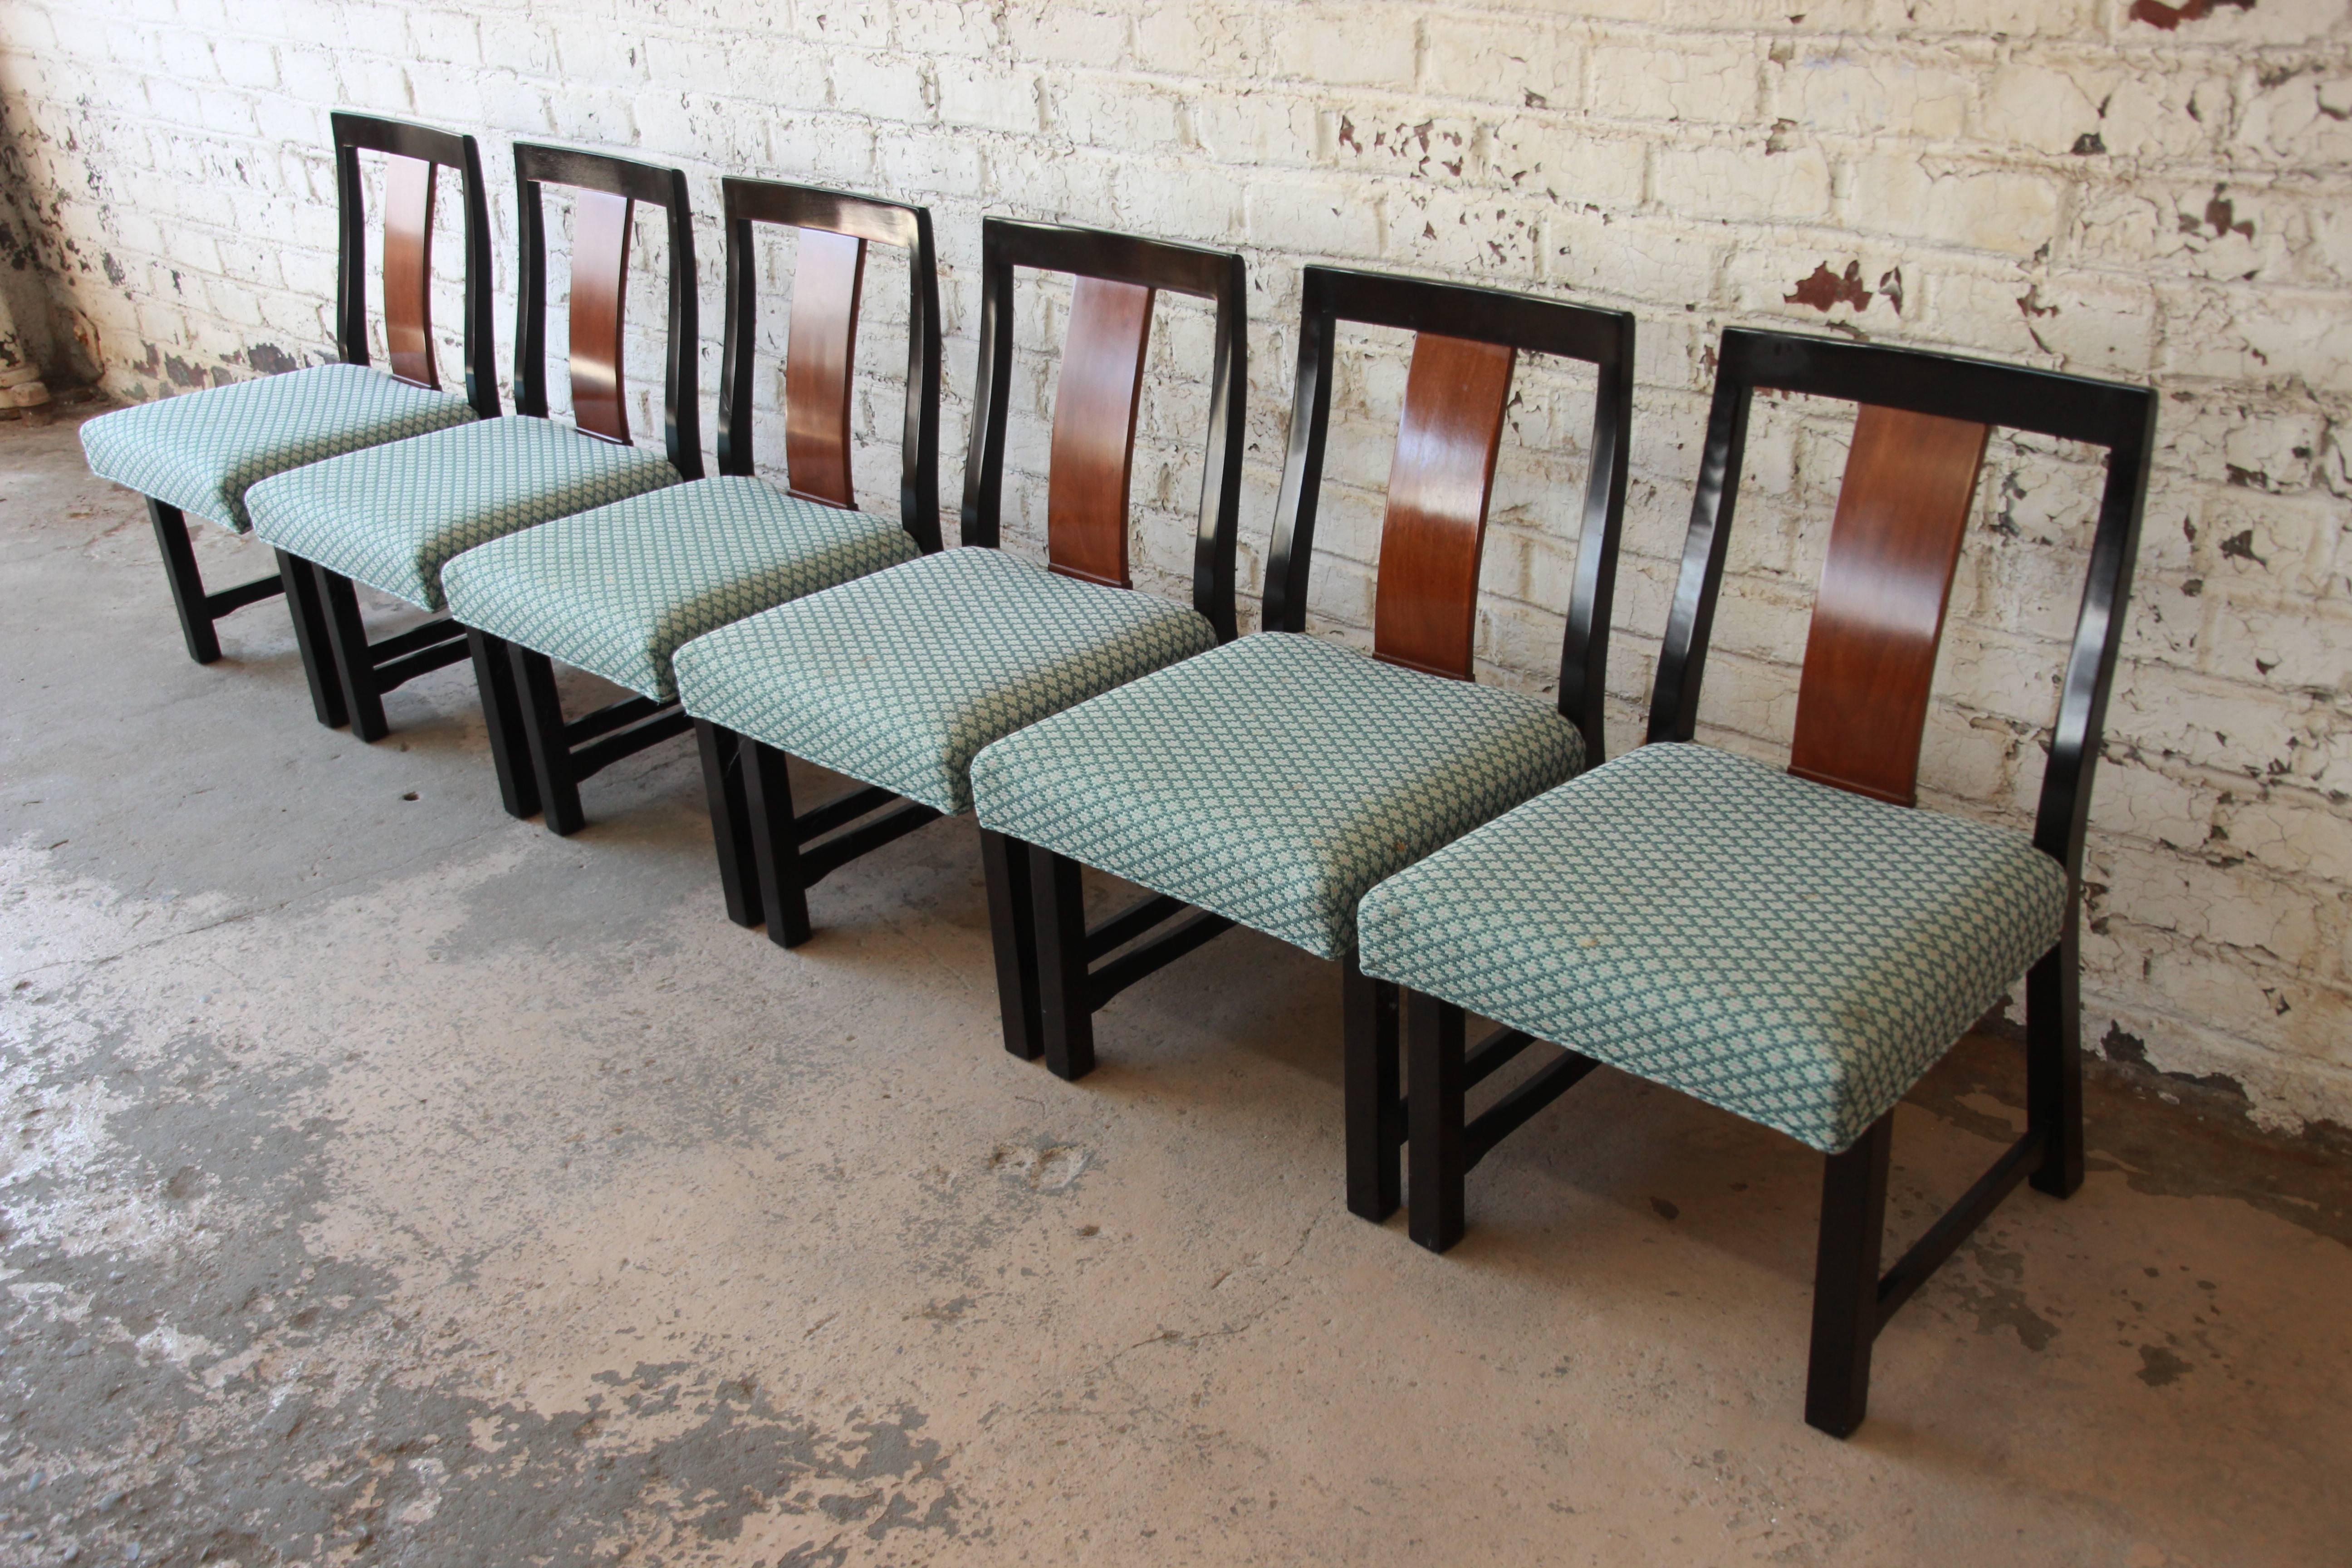 An outstanding set of six Mid-Century Modern dining chairs designed by Edward Wormley for Dunbar Furniture. The chairs feature solid walnut frames and slightly curved backrests for comfort. The light blue upholstery is original and in good